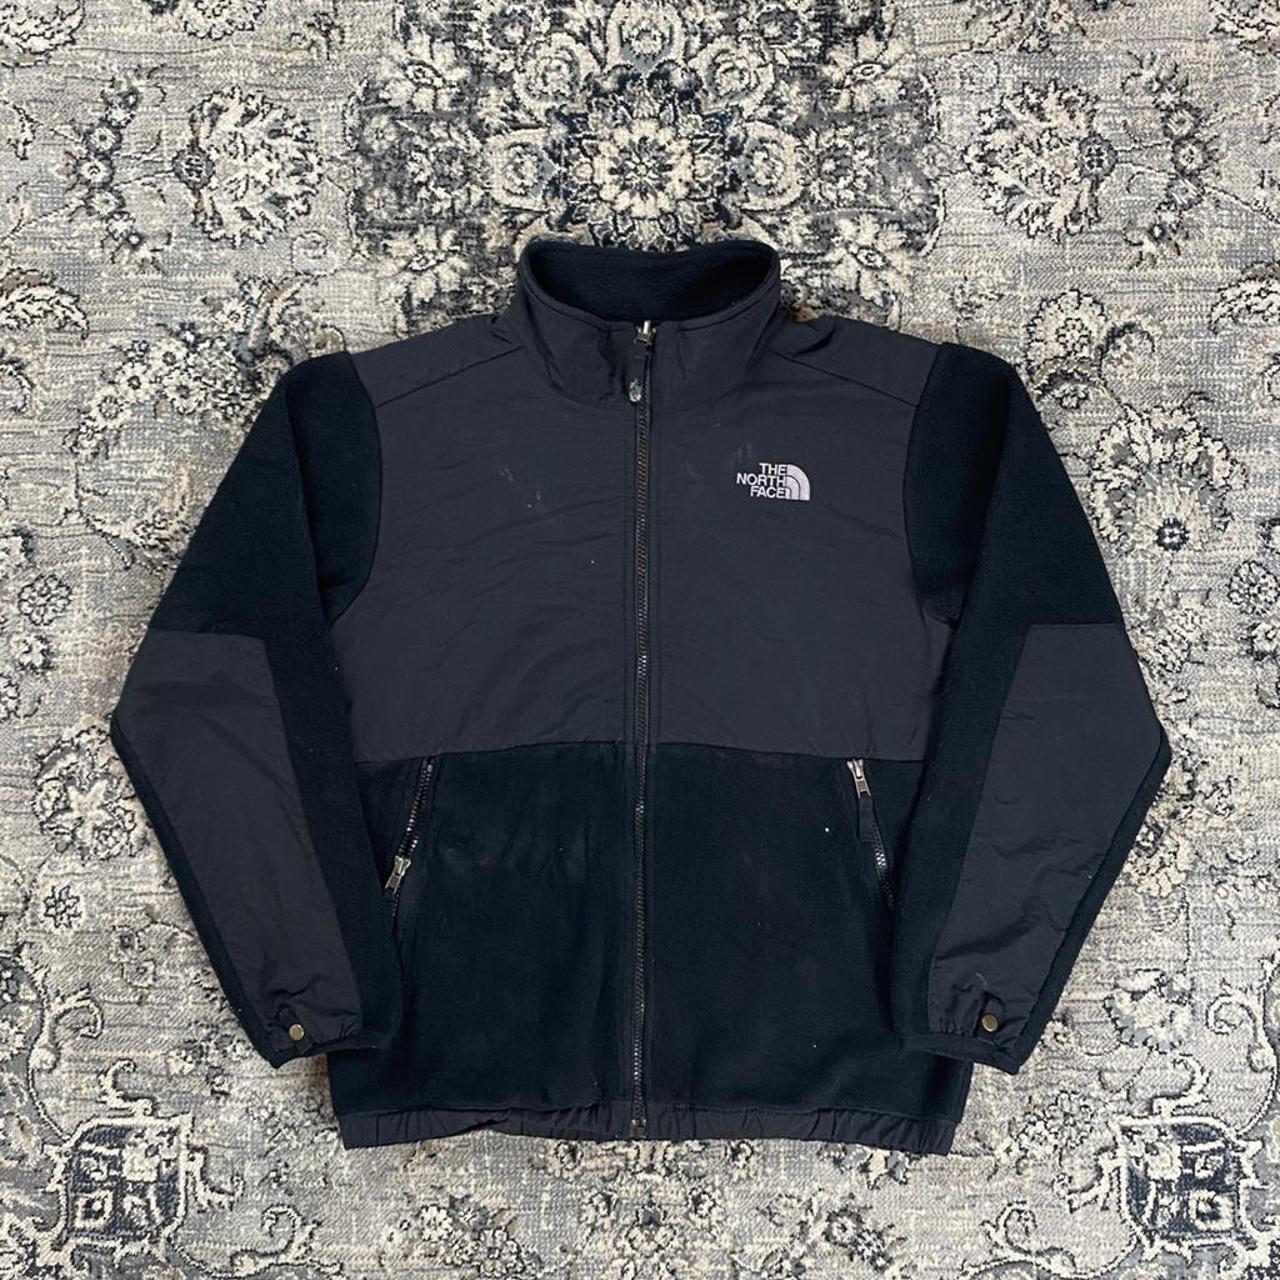 THE NORTH FACE TECH JACKET DETAILS TAG SIZE: BOYS... - Depop